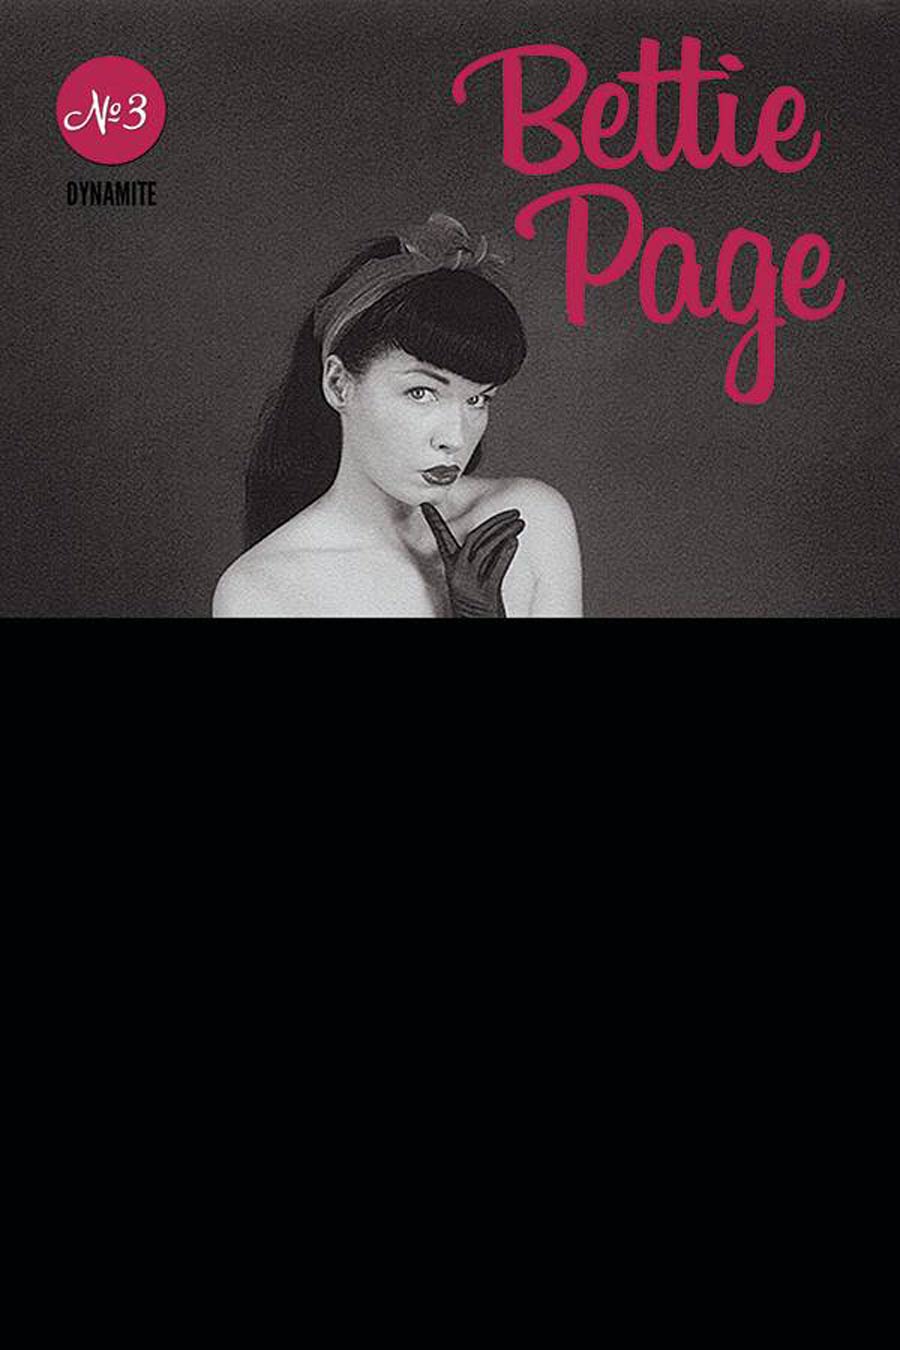 Bettie Page Vol 3 #3 Cover F Variant Black Bag Risque Photo Cover With Polybag